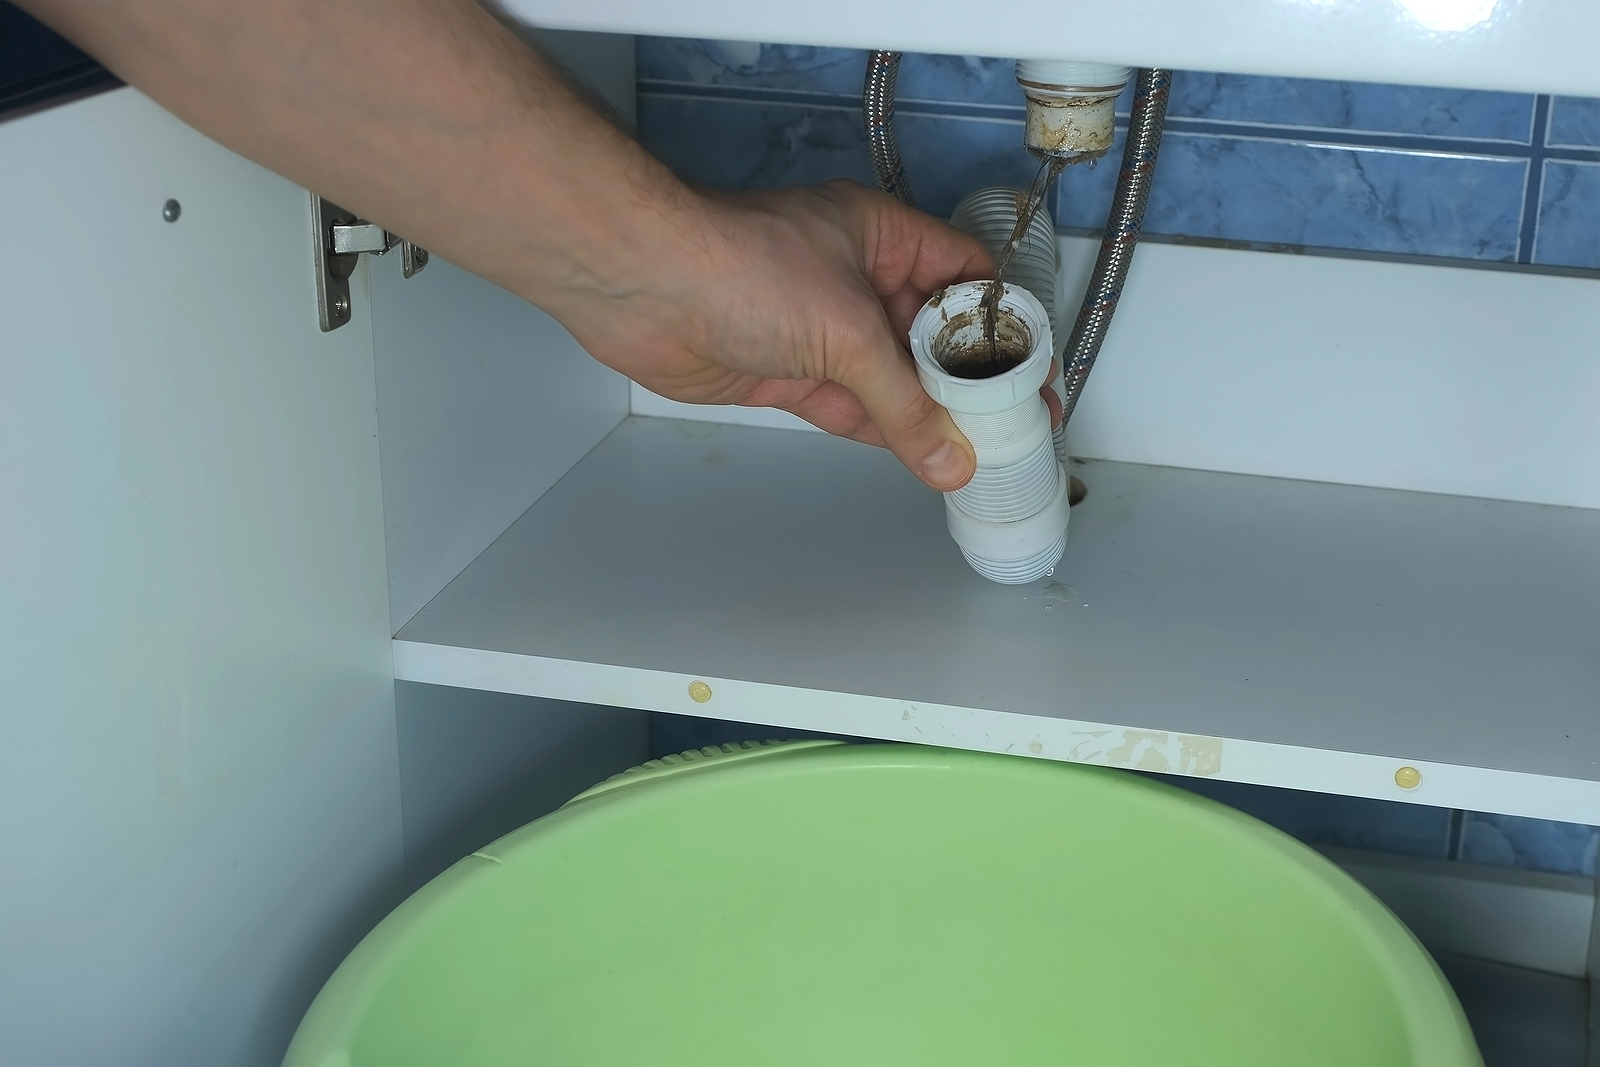 18 Simple And Surprisingly Effective Ways to Unclog a Sink ...